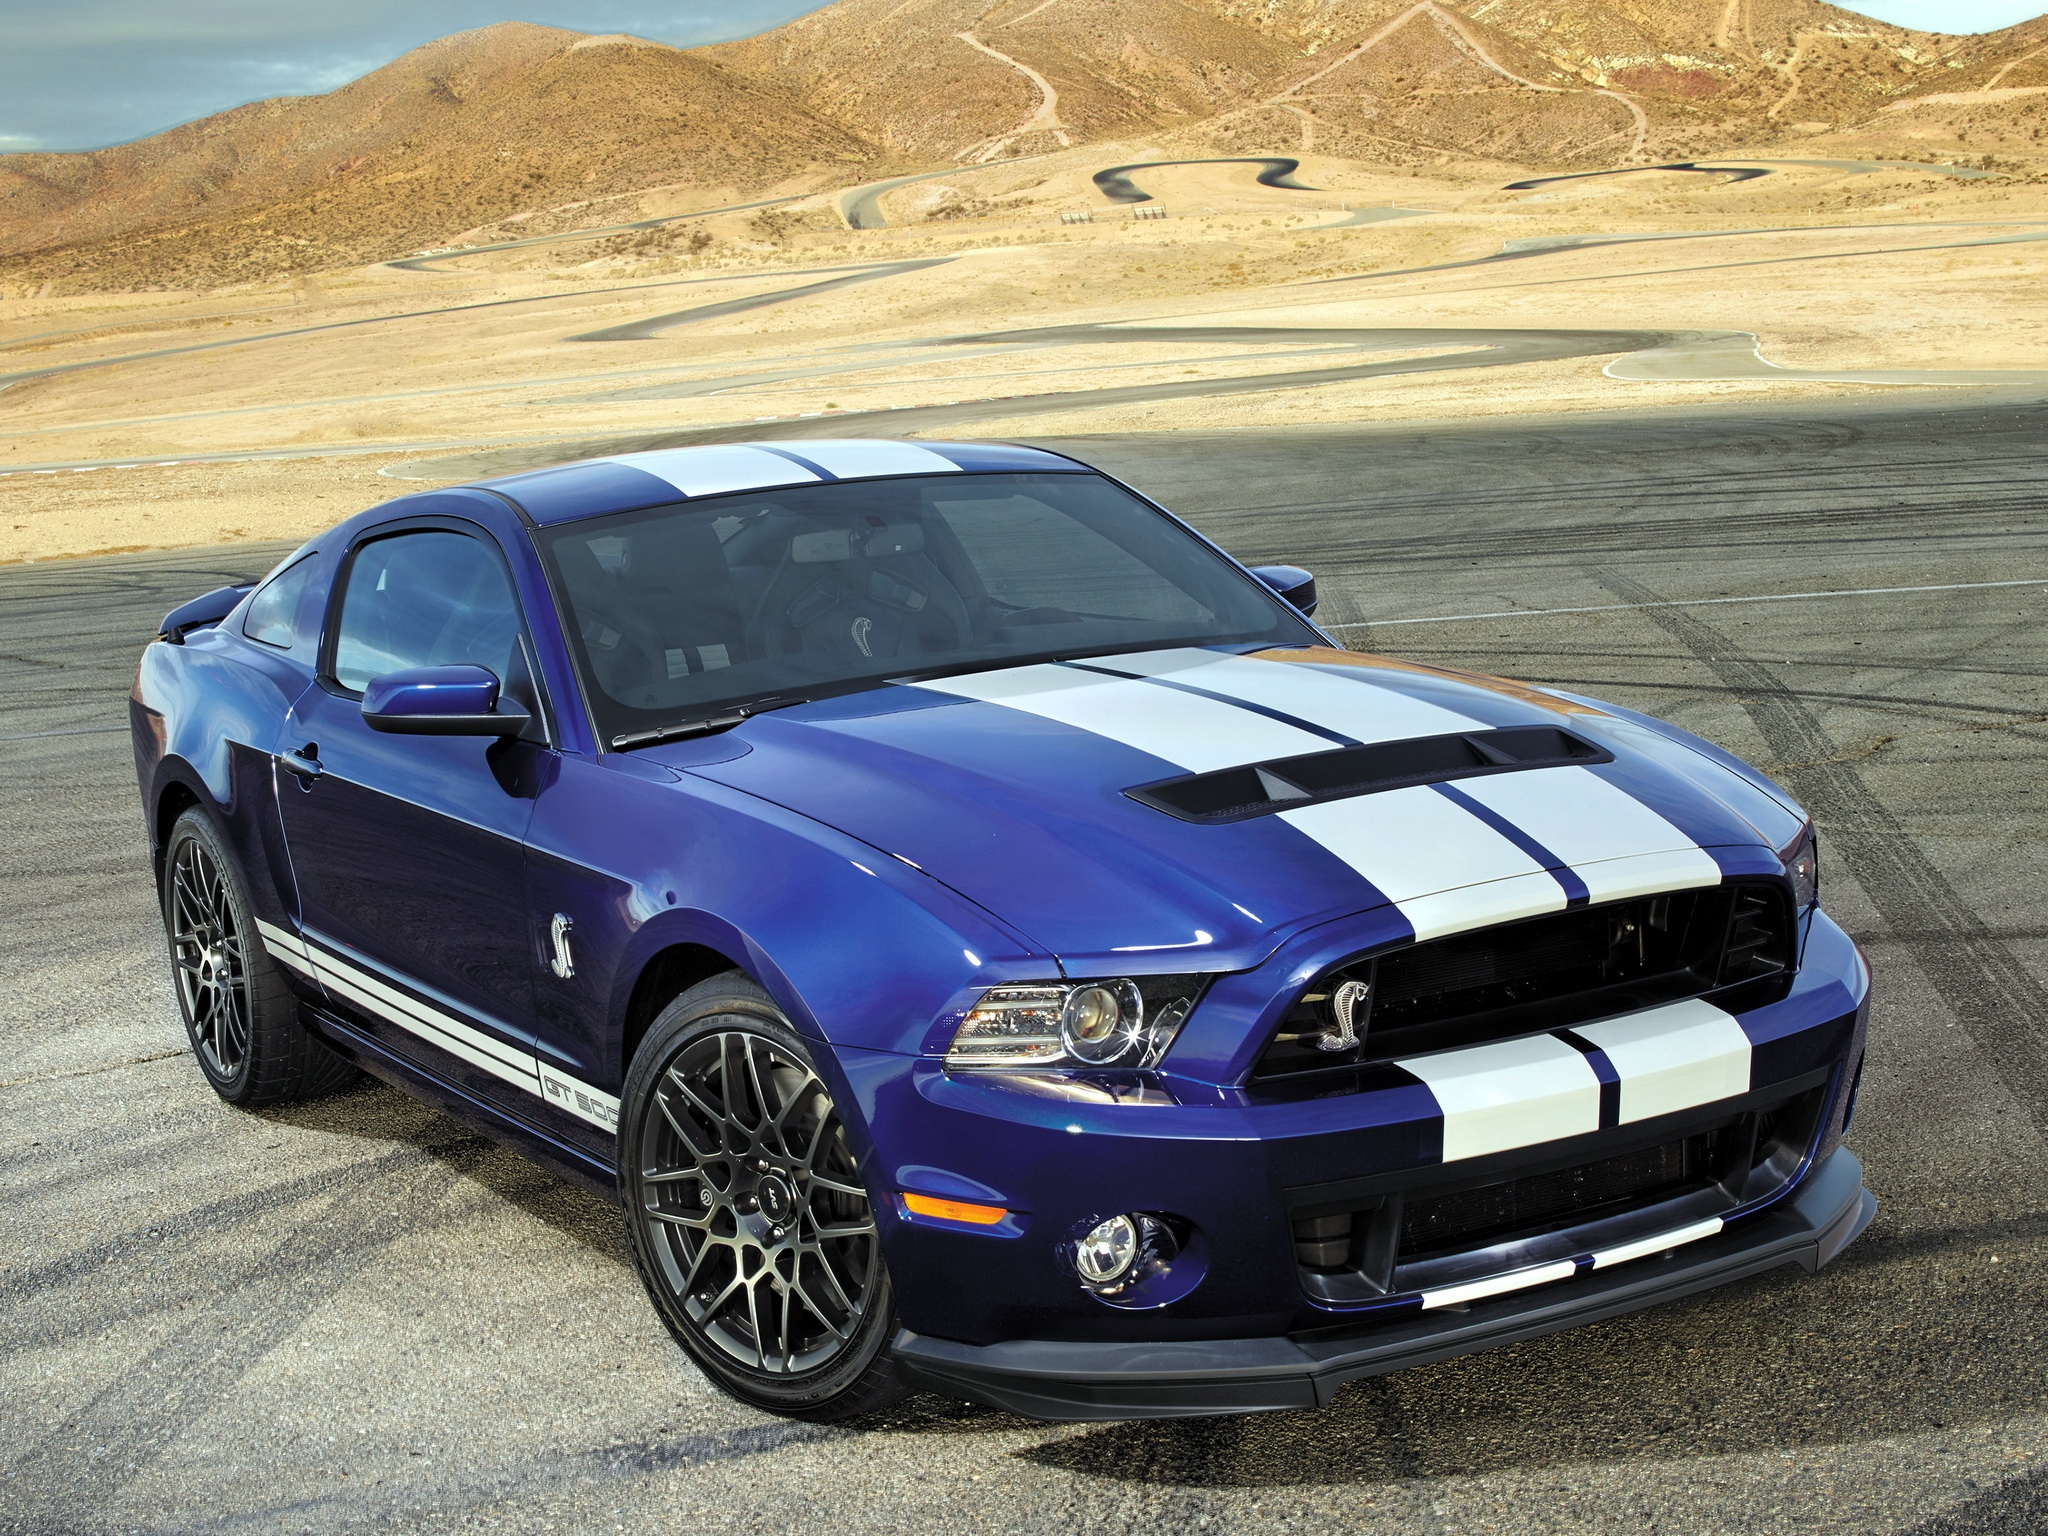 Wallpapers wallpaper ford mustang shelby gt 500 muscle cars on the desktop